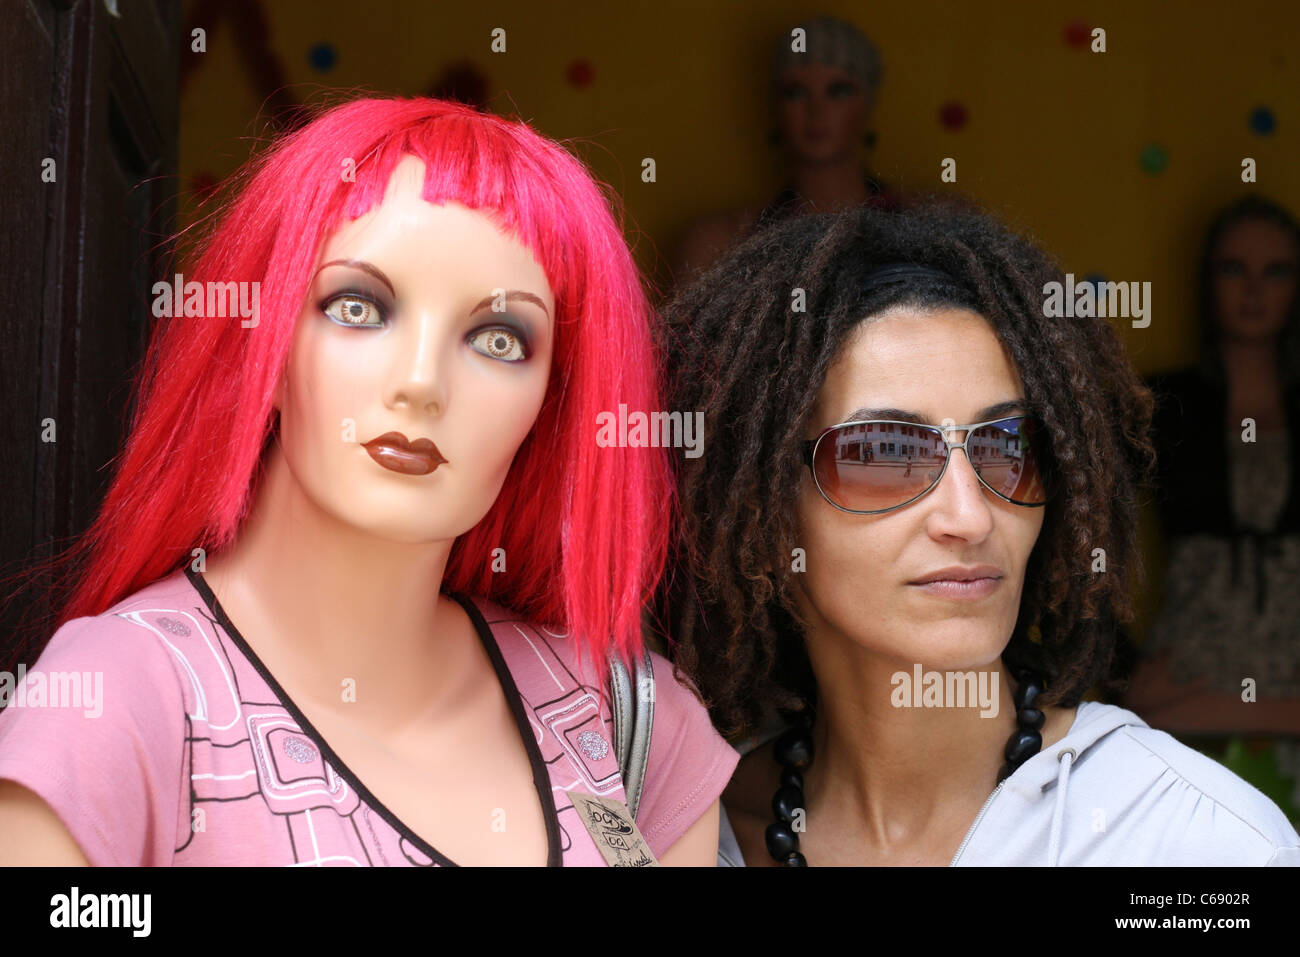 A traveler poses next to a clothes shop mannequin in Chachapoyas, Amazonas, Peru, South America Stock Photo